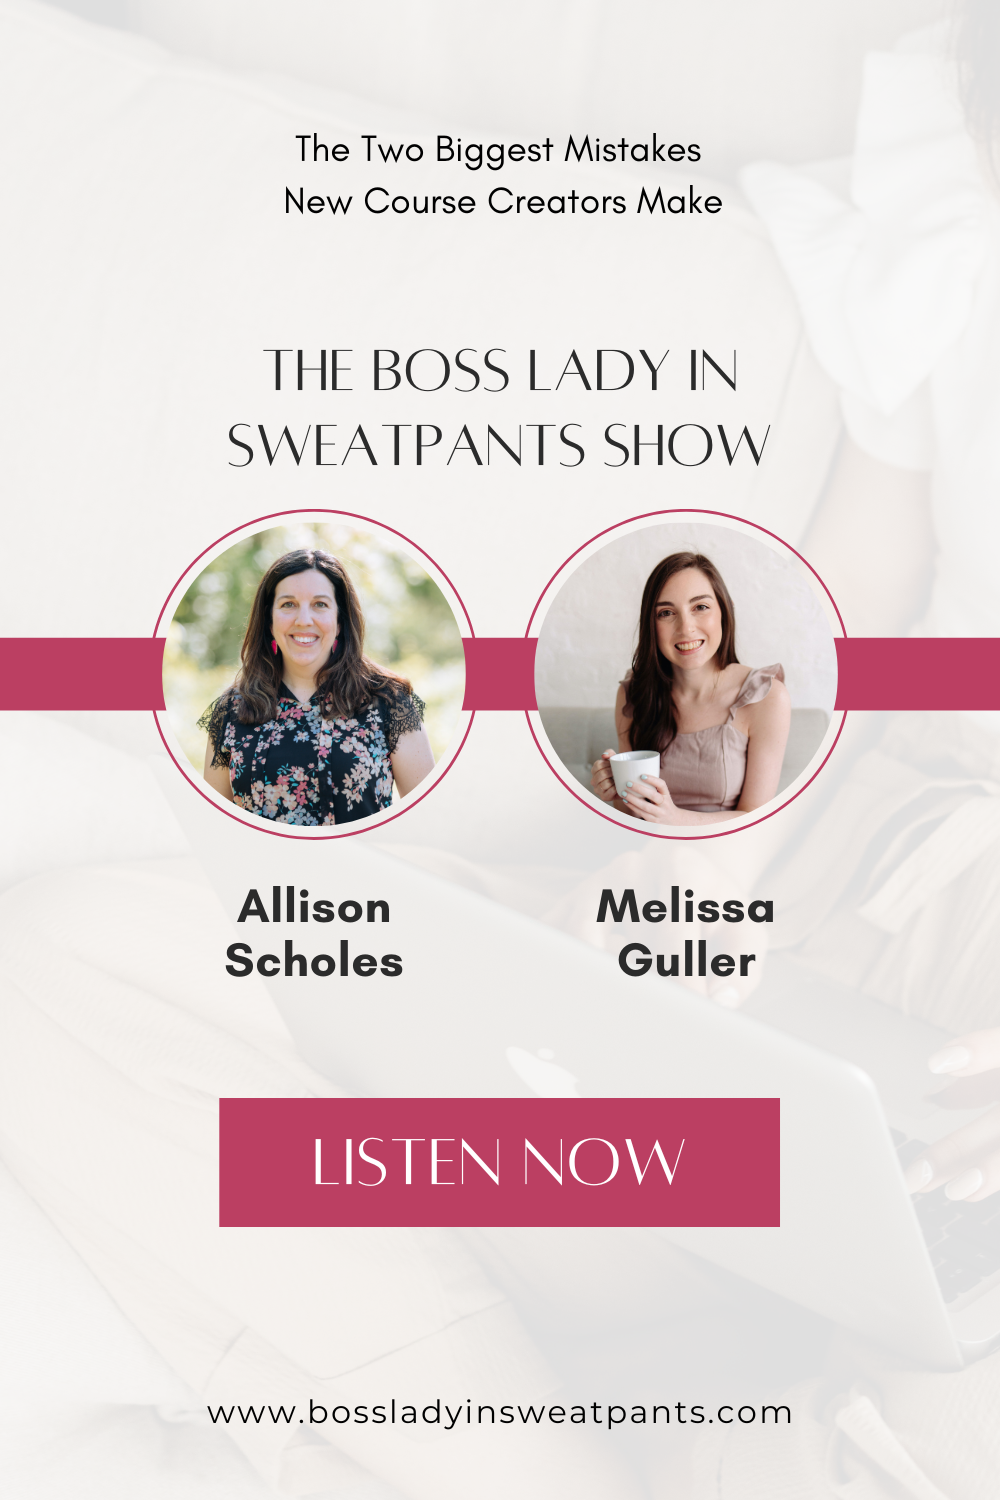 graphic with photos of Allison Scholes and Melissa Guller for the podcast, The Boss Lady in Sweatpants Show: The Two Biggest Mistakes New Course Creators Make